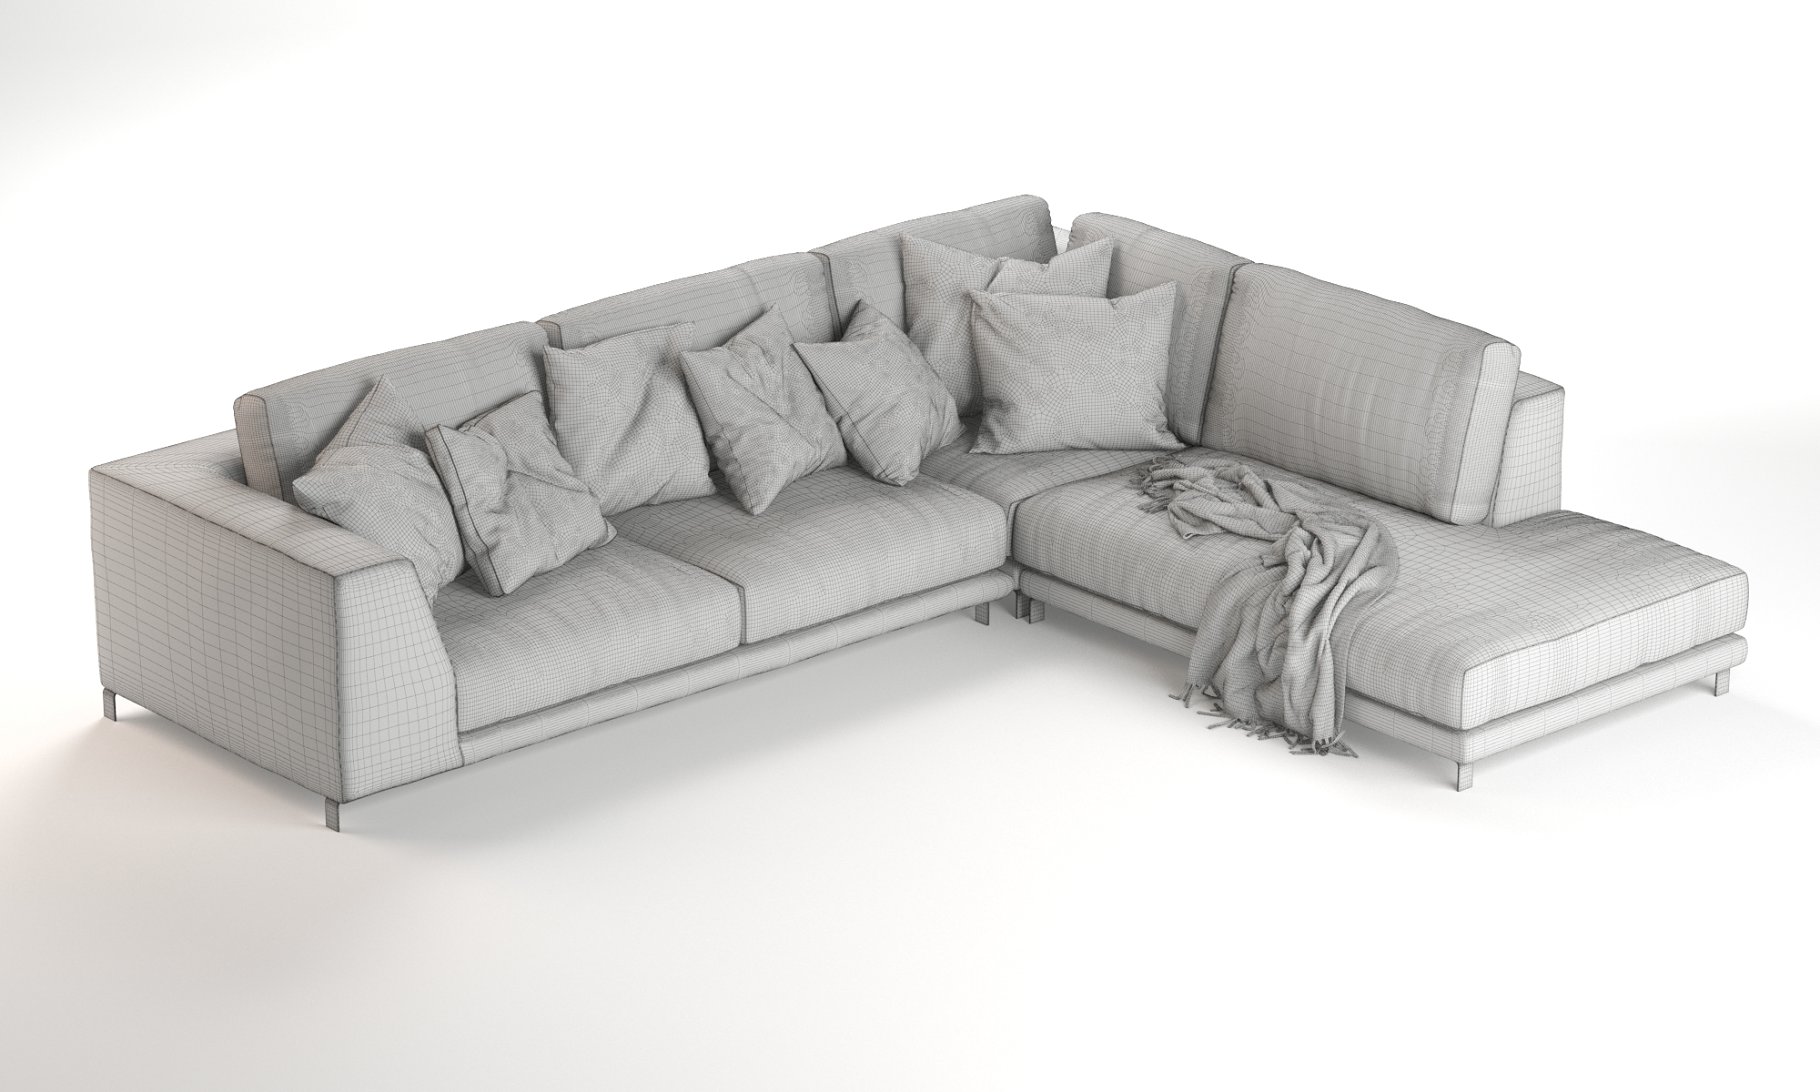 Rendering an irresistible 3d model of a corner sofa without textures